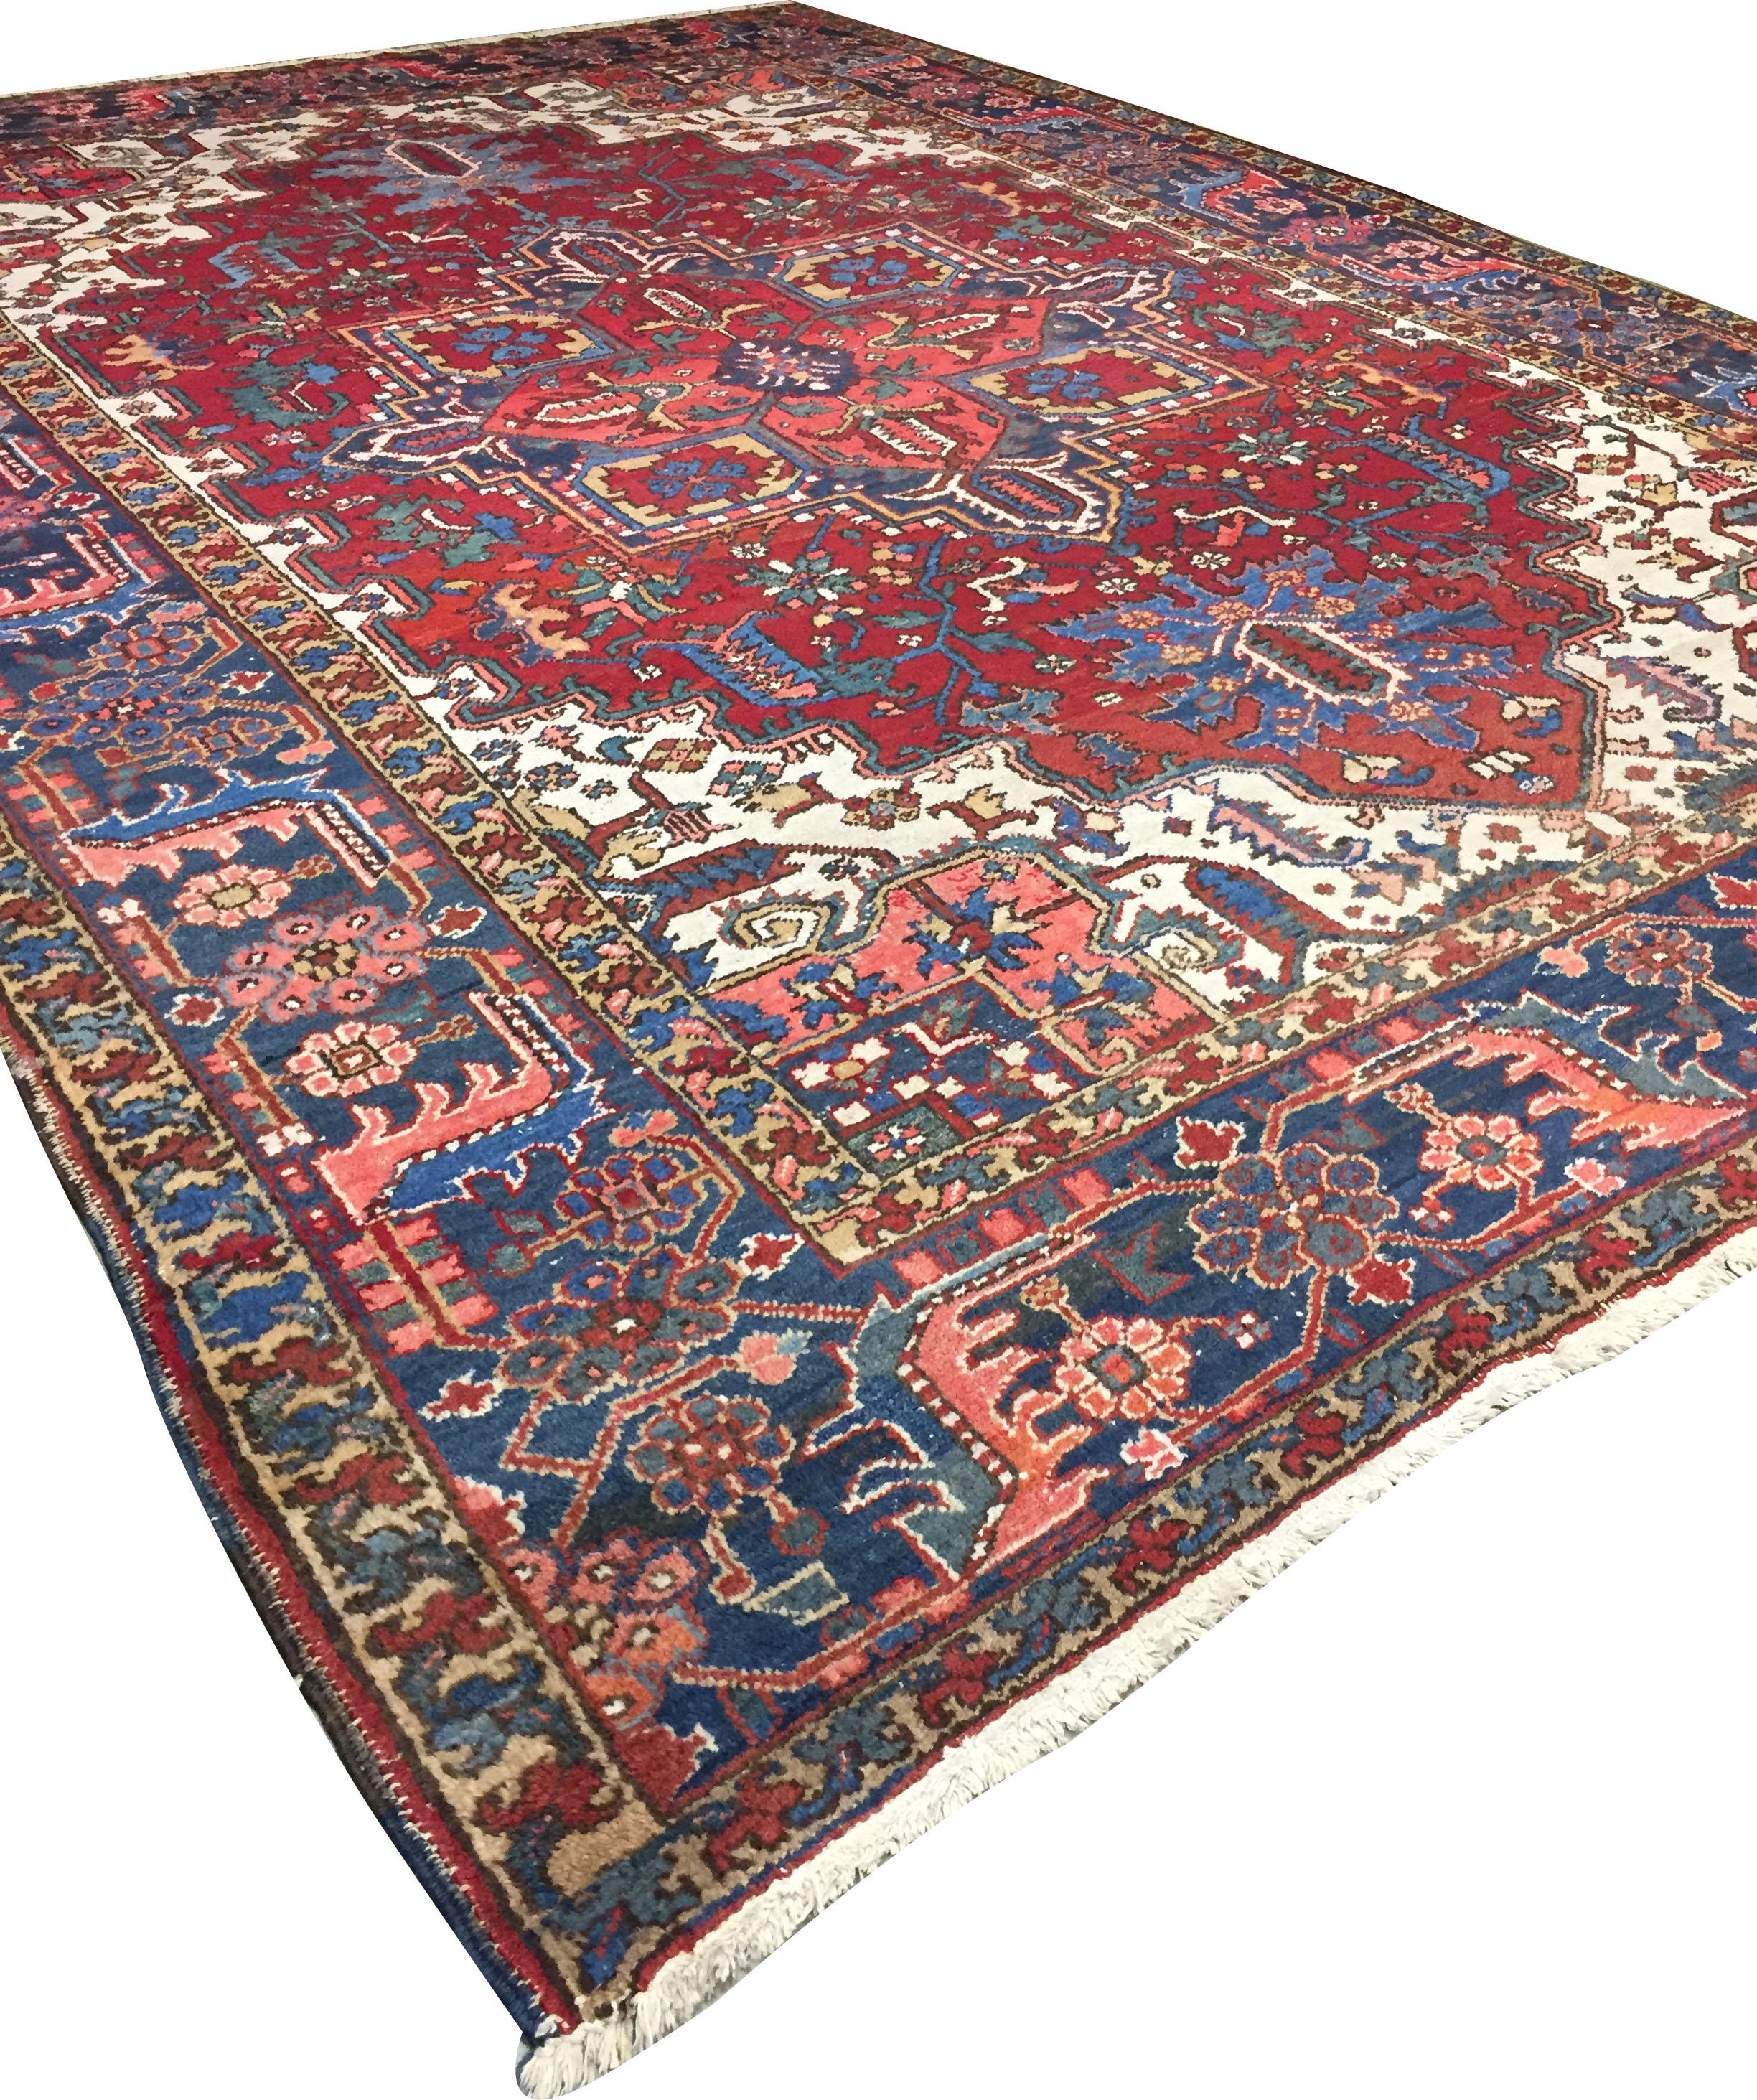 Vintage Persian Heriz Rug 8'1 X 11'5. As perpetually fashionable as they are collectible, traditional Heriz luxury handmade rugs are skillfully woven in vibrant colors and emphatic geometric designs. The Heriz district of NW Persia has been weaving